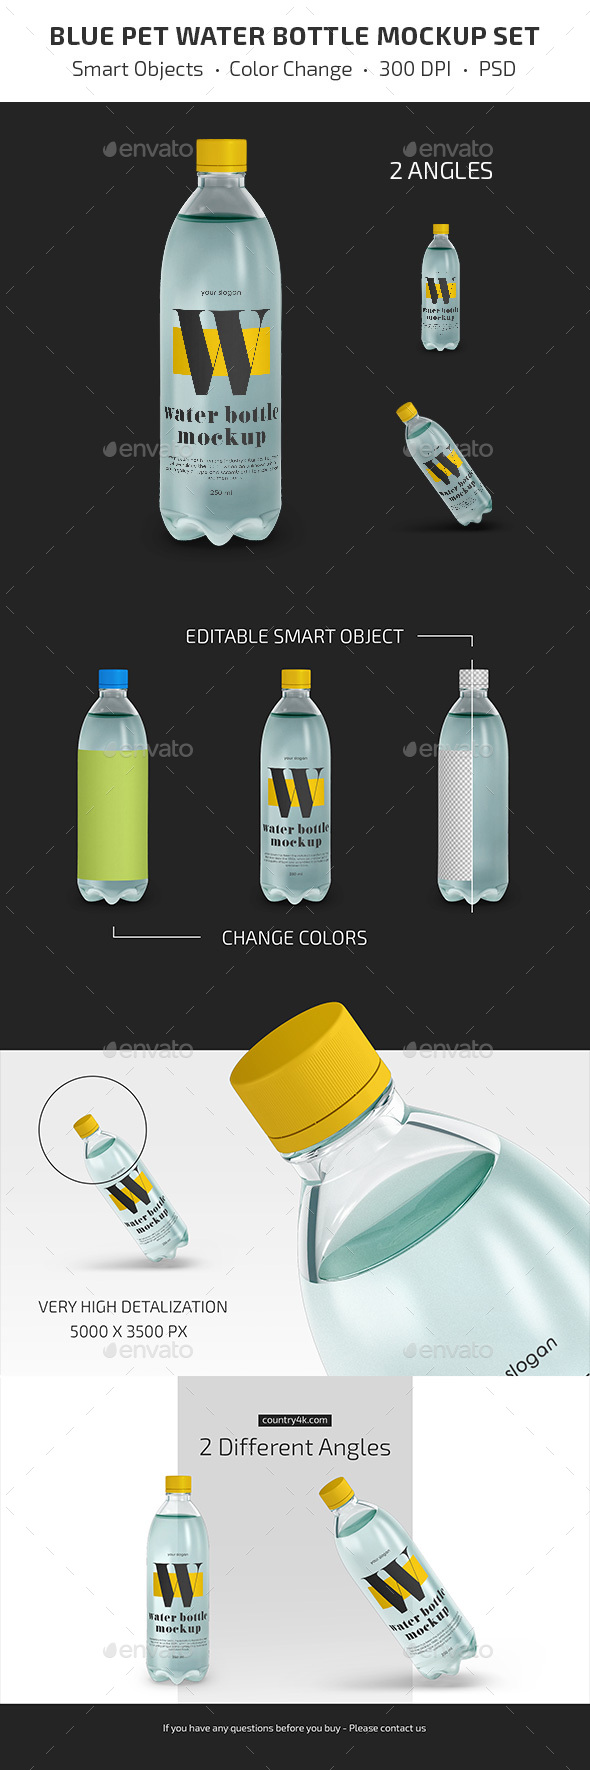 Download Blue Pet Water Bottle Mockup Set By Country4k Graphicriver